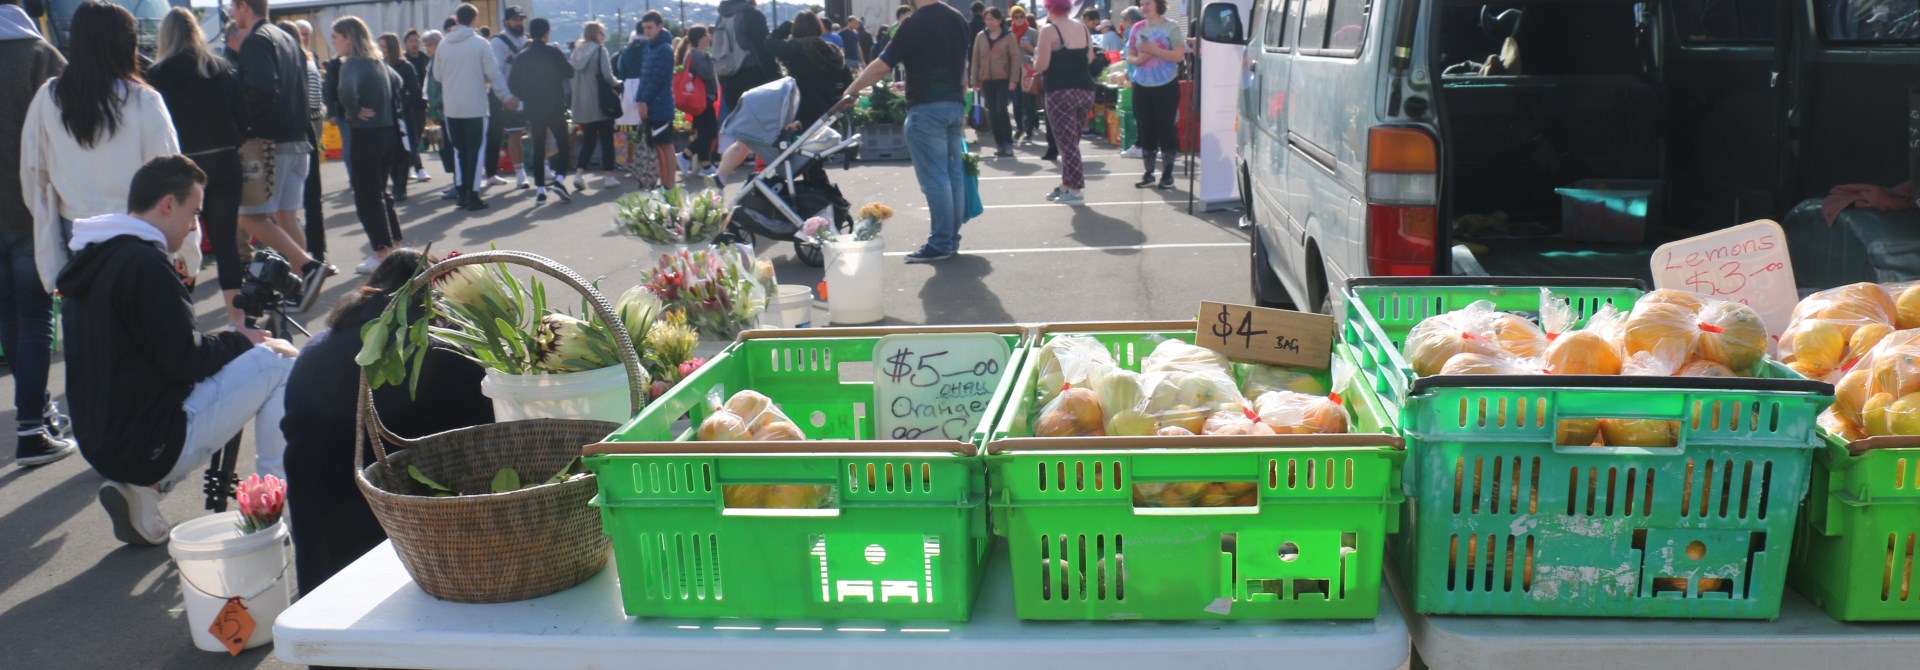 A table of green bins, filled with bags of citrus fruit, outdoors at Harbourside Market, with a van and customers in the background. 